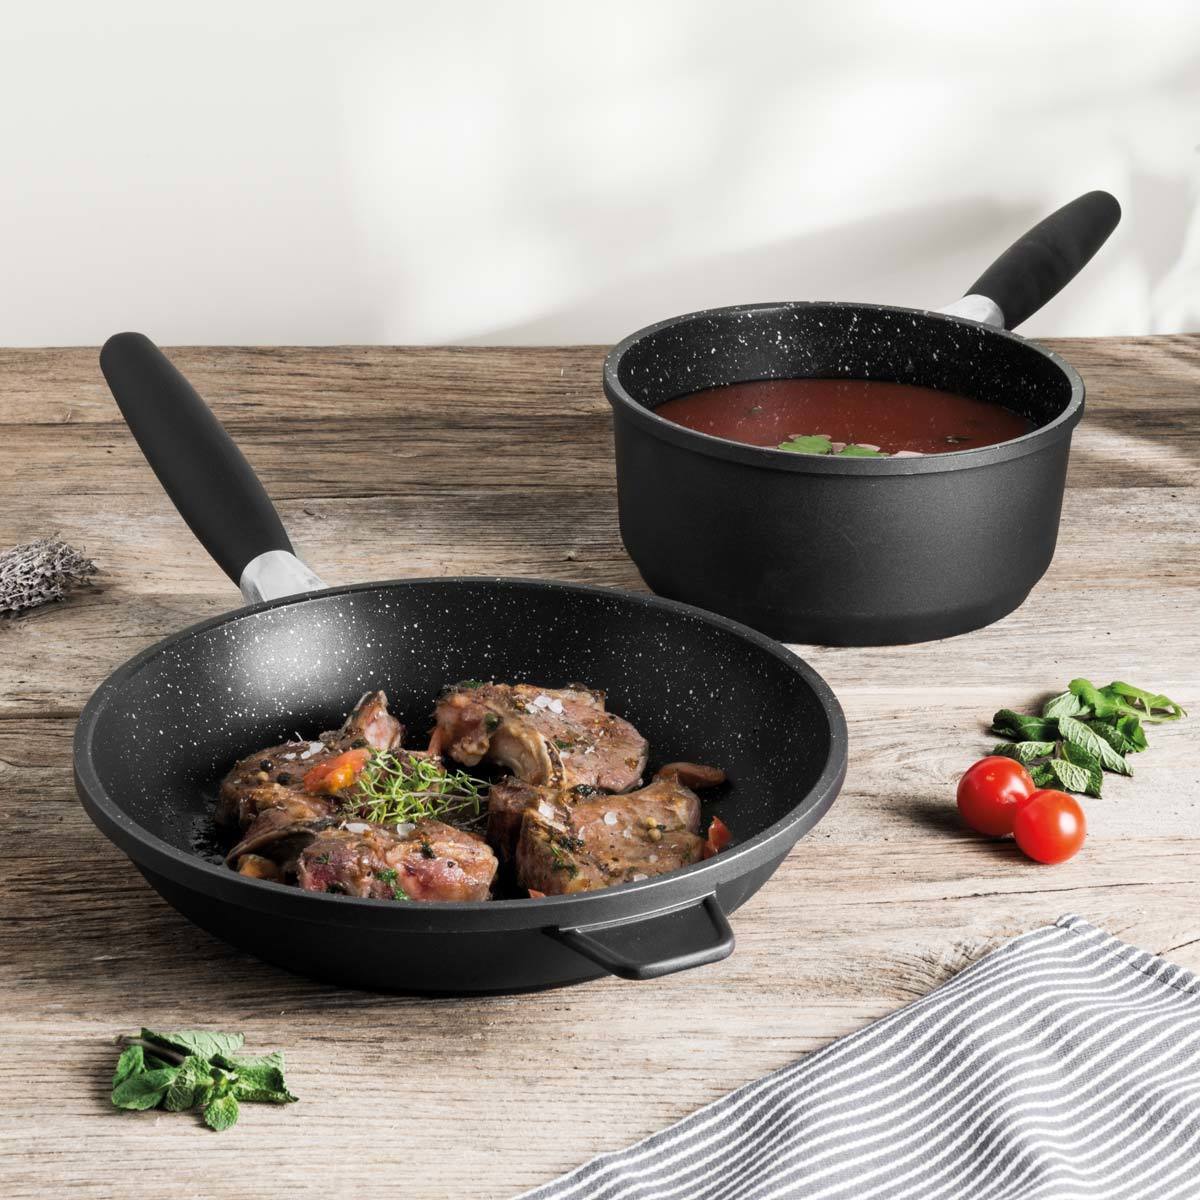 Search for Berghoff Eurocast Cookware